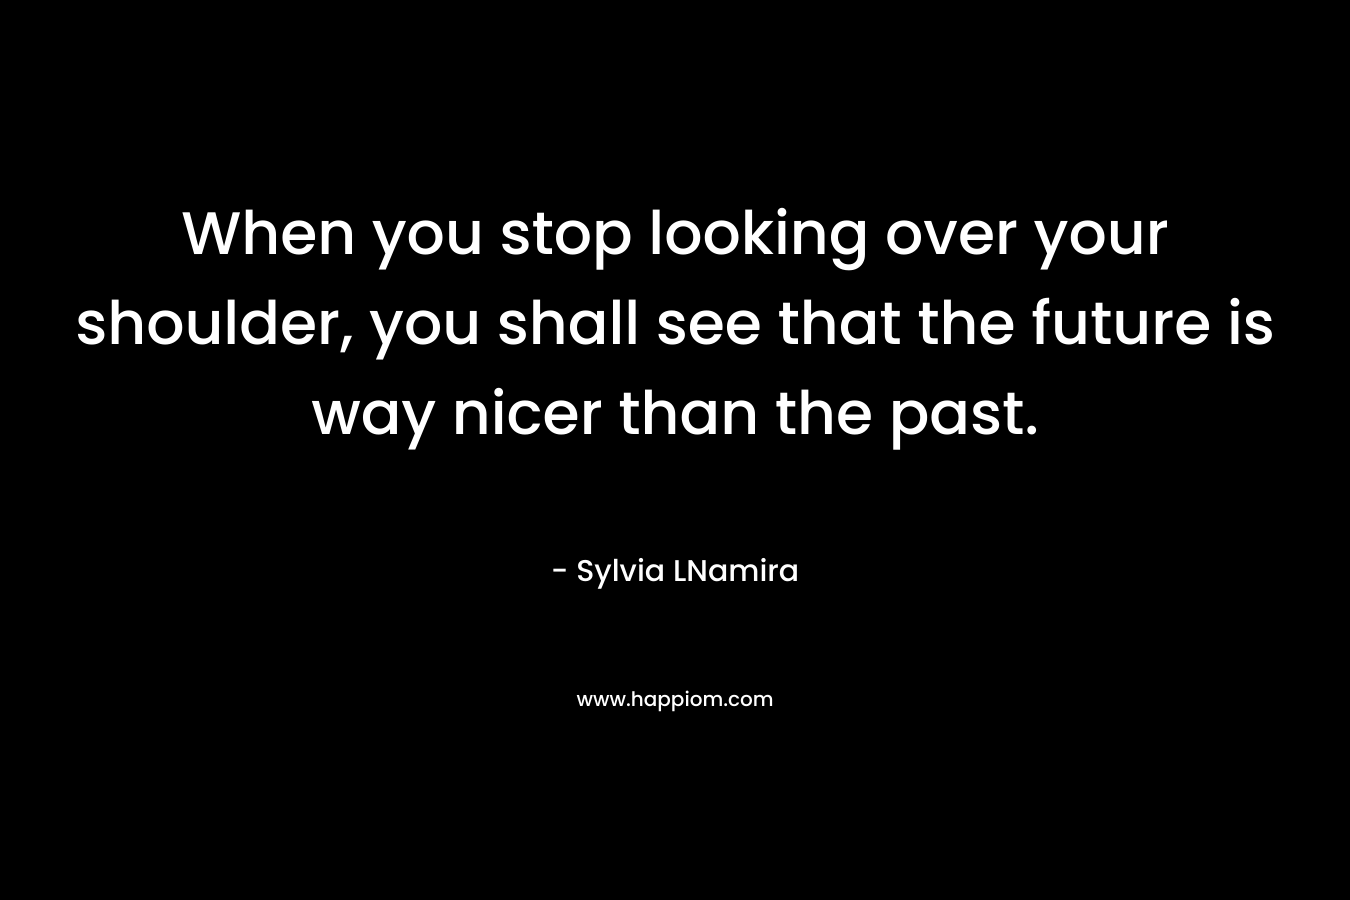 When you stop looking over your shoulder, you shall see that the future is way nicer than the past.